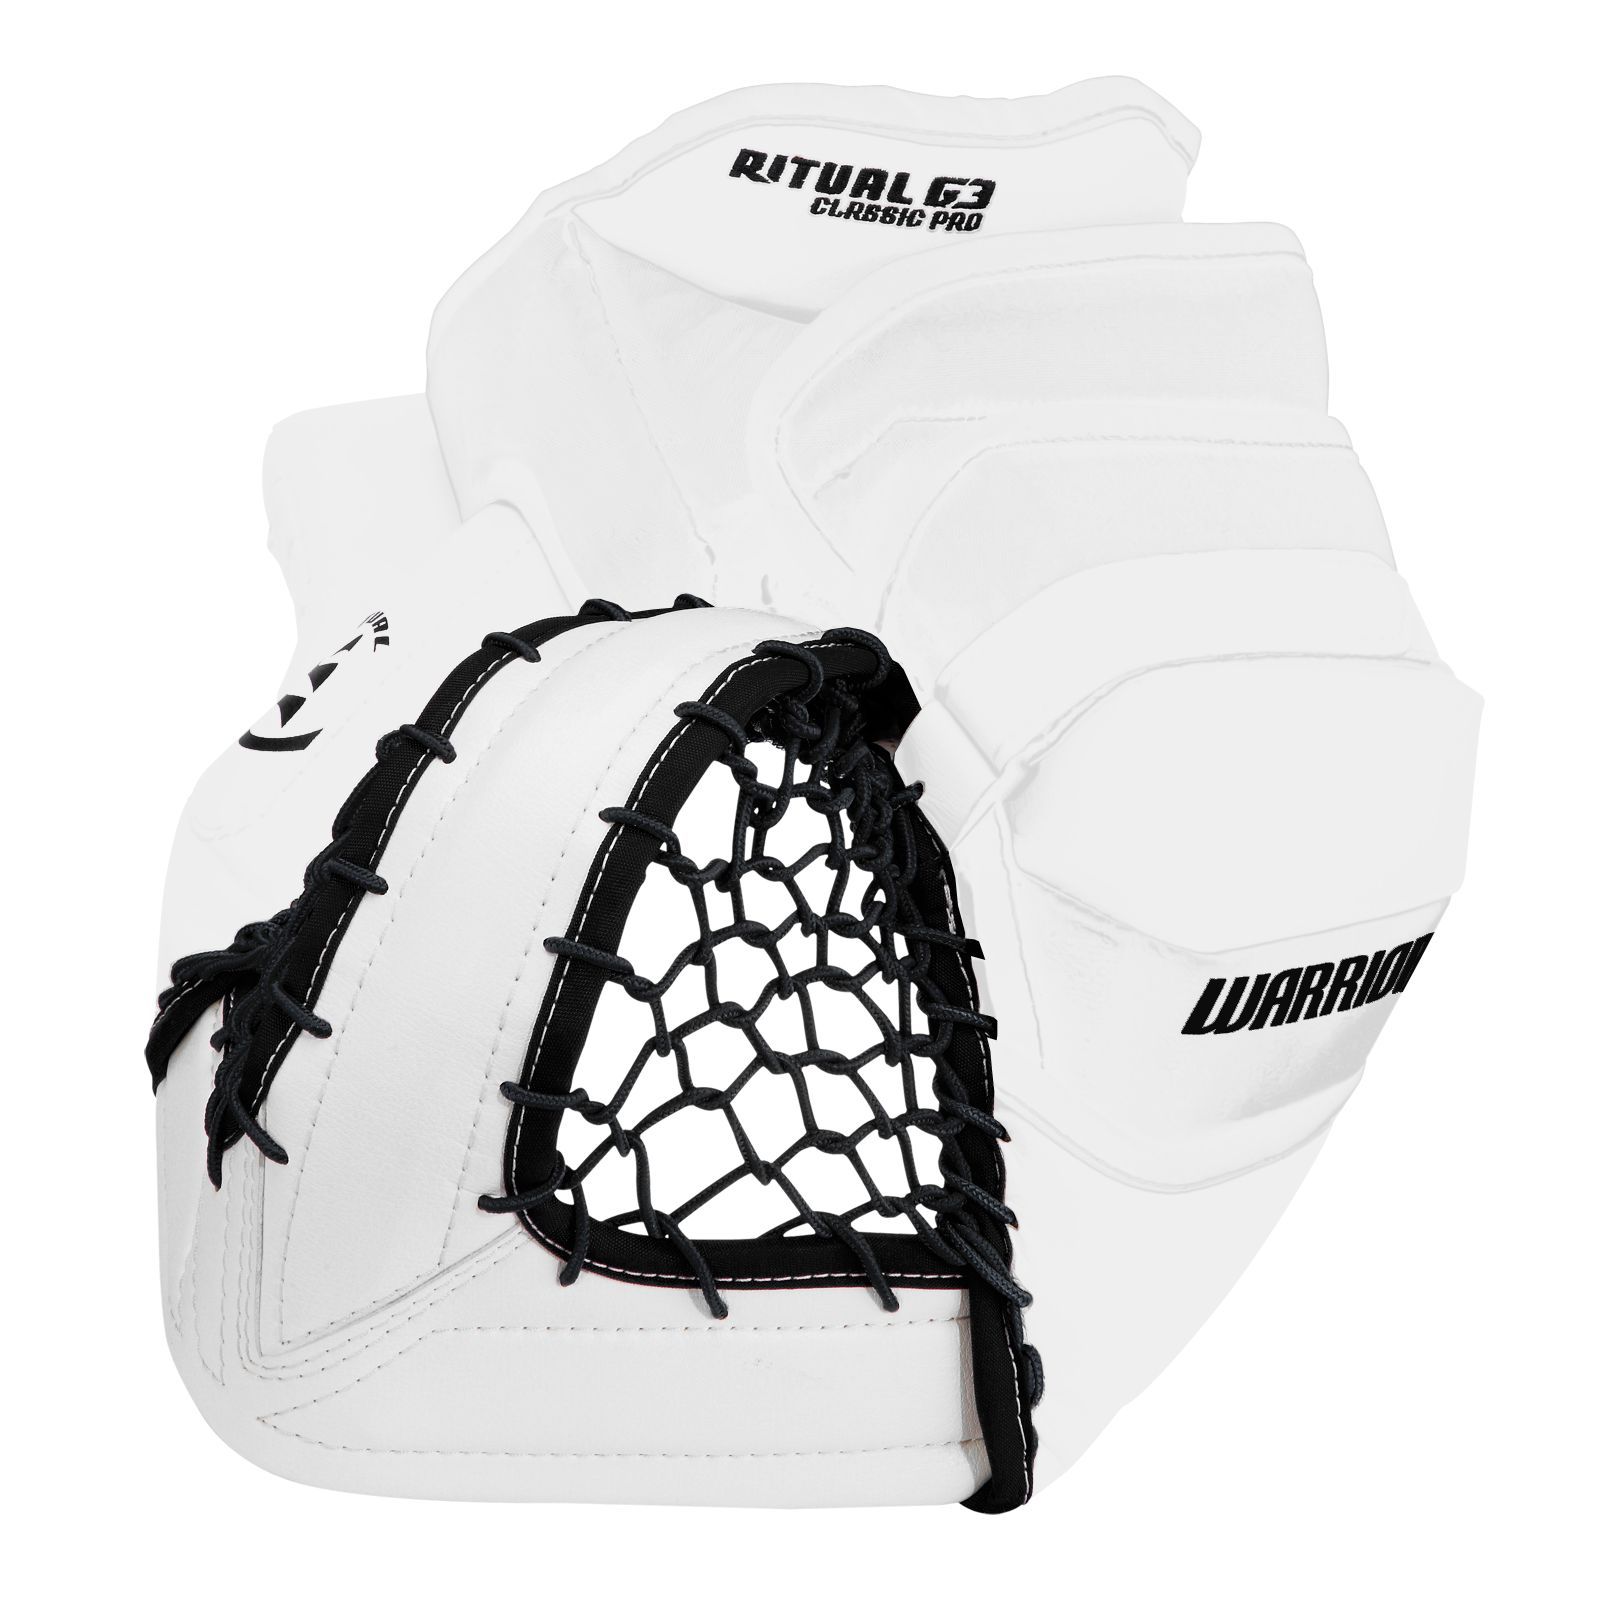 Ritual G3 Pro Classic Trapper, White image number 1